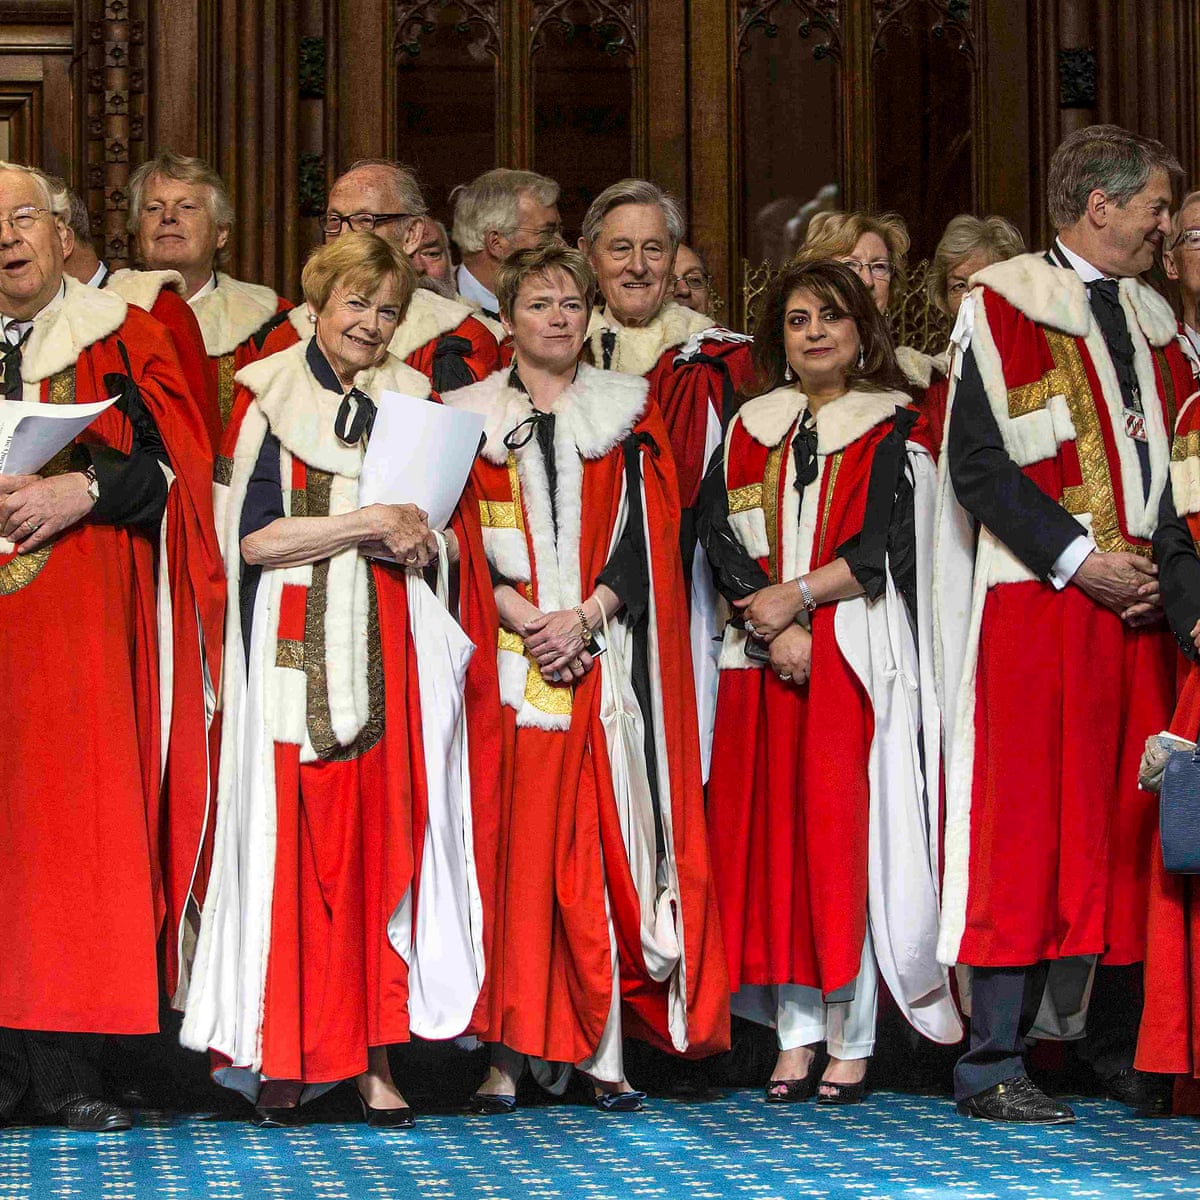 Don't abolish the Lords. History shows it really can be reformed